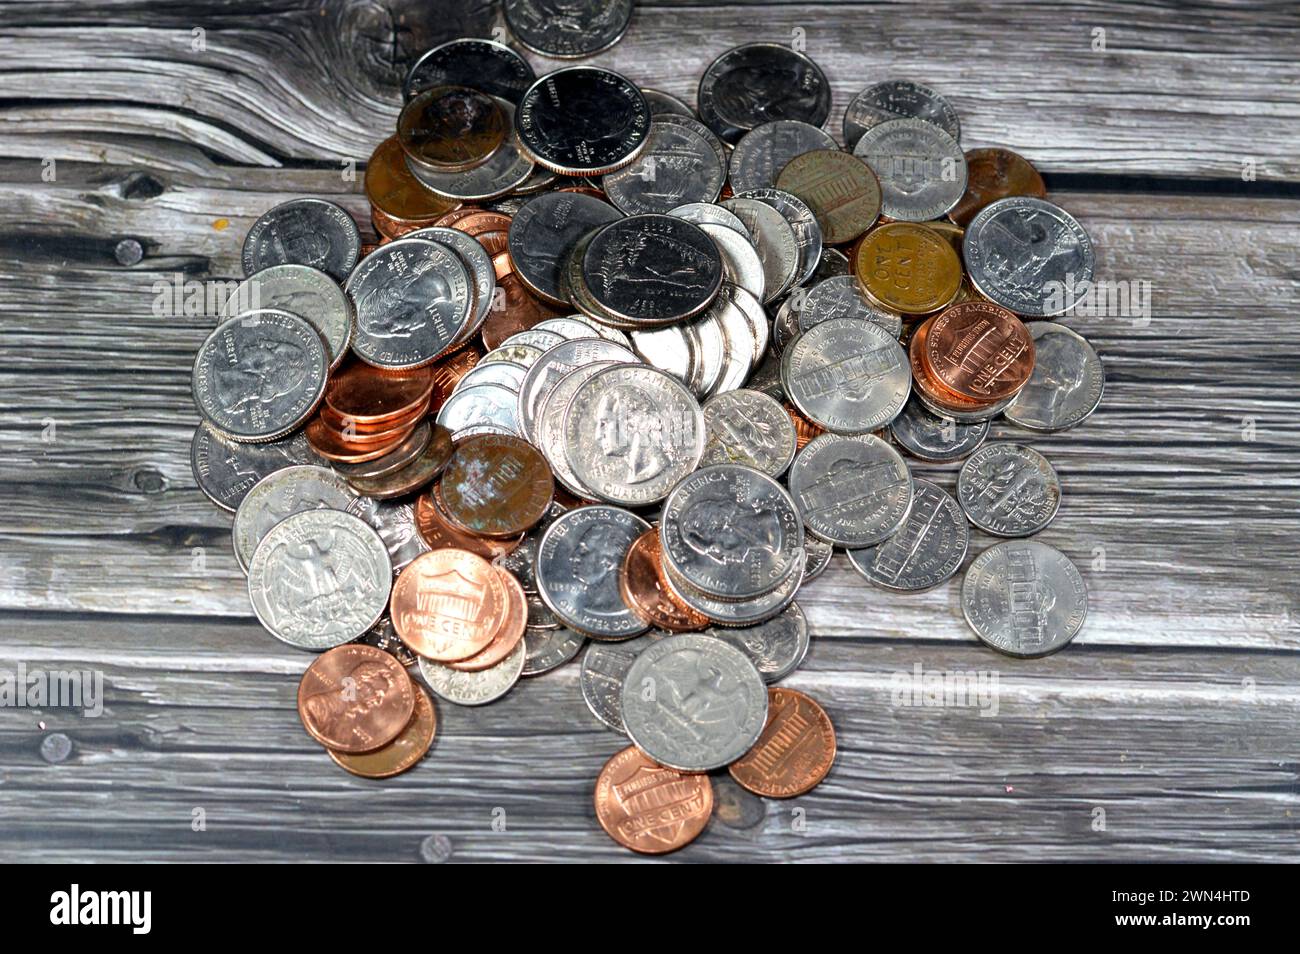 Pile of American coins of 1 cent, 5, 10, 25 cents quarter and one dollar, Vintage retro old American money background, United States of America dollar Stock Photo